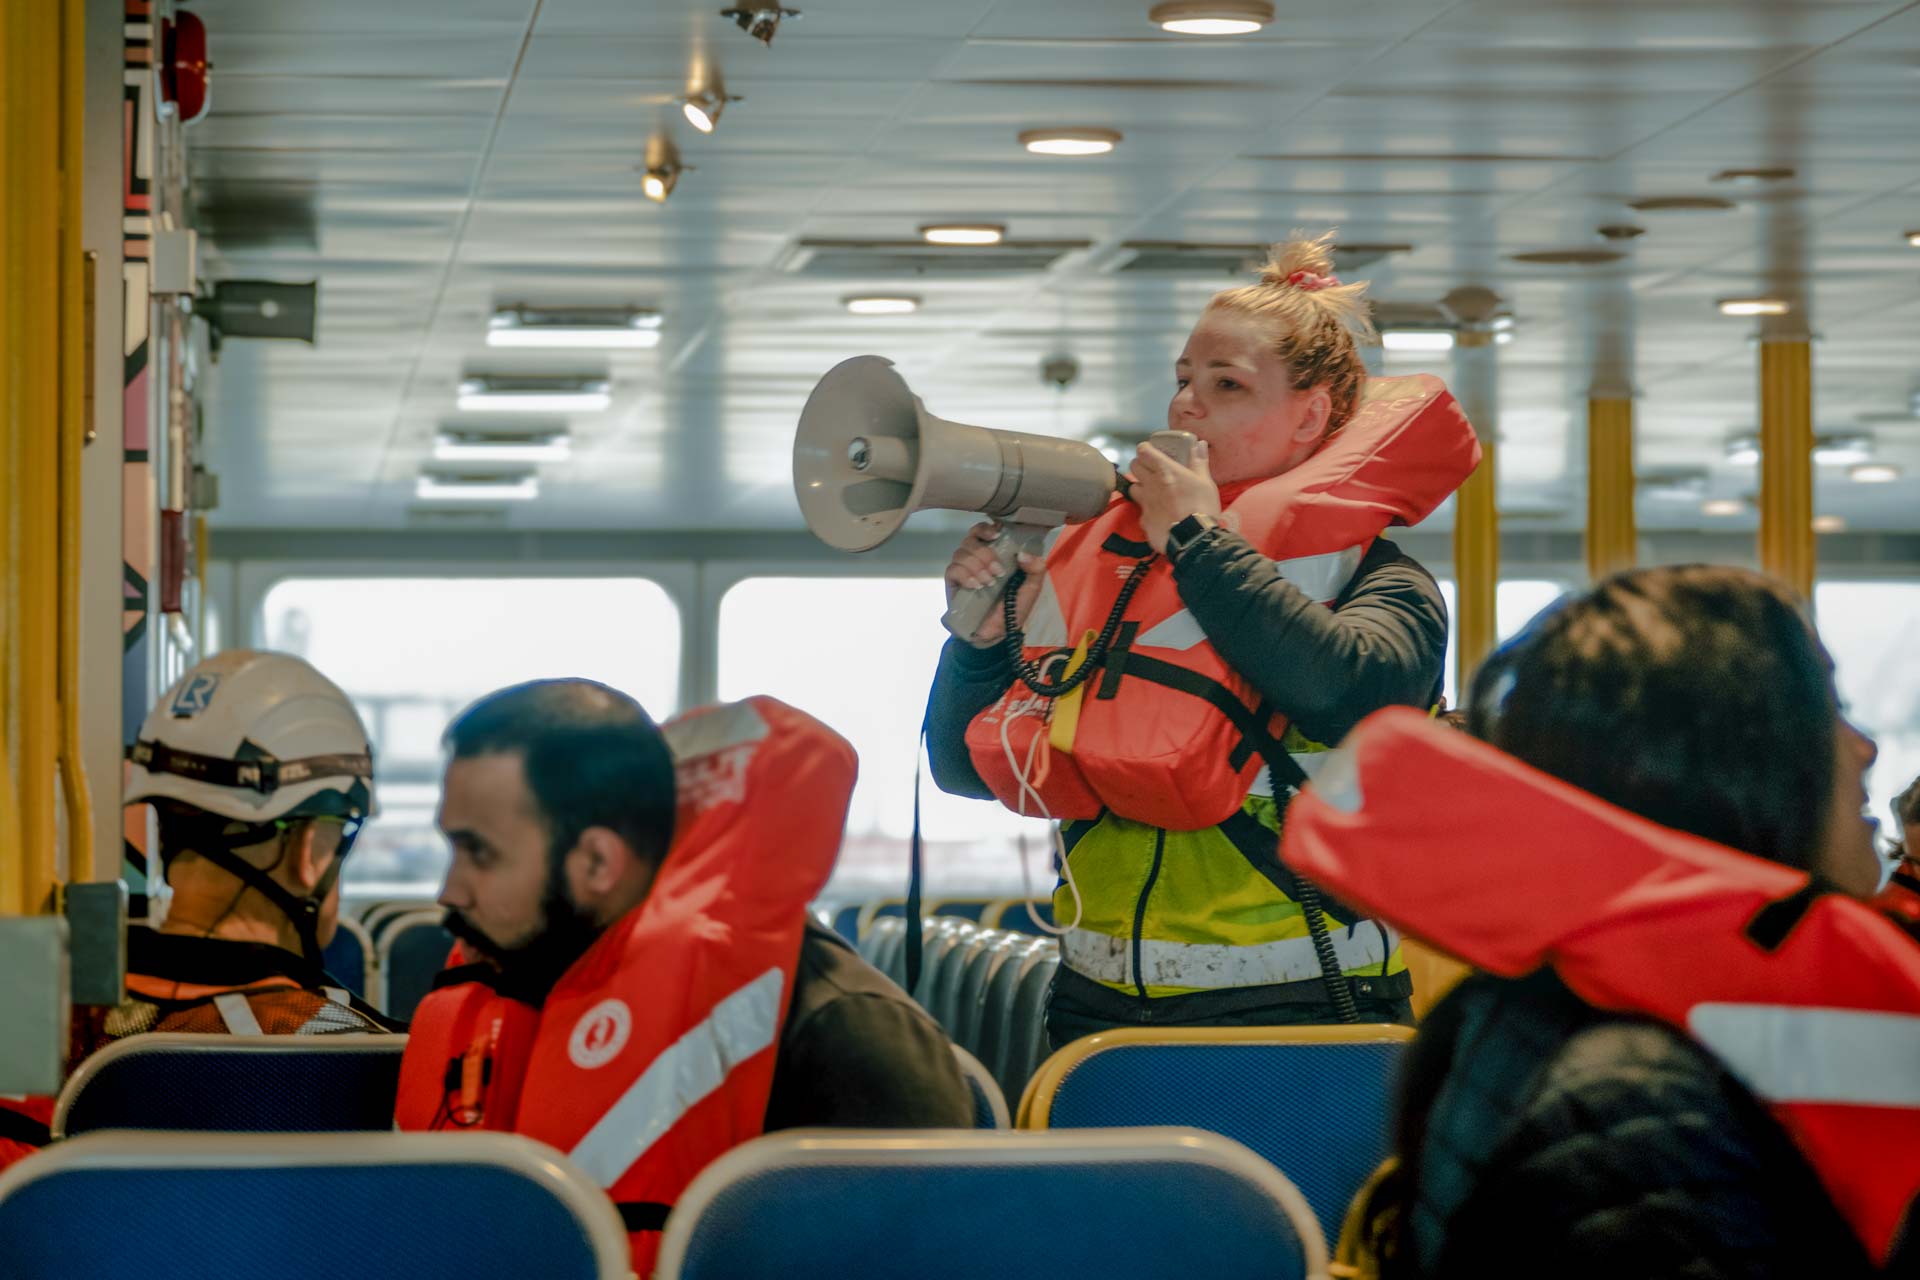 A SeaBus crew members makes an announcement to SeaBus passengers.